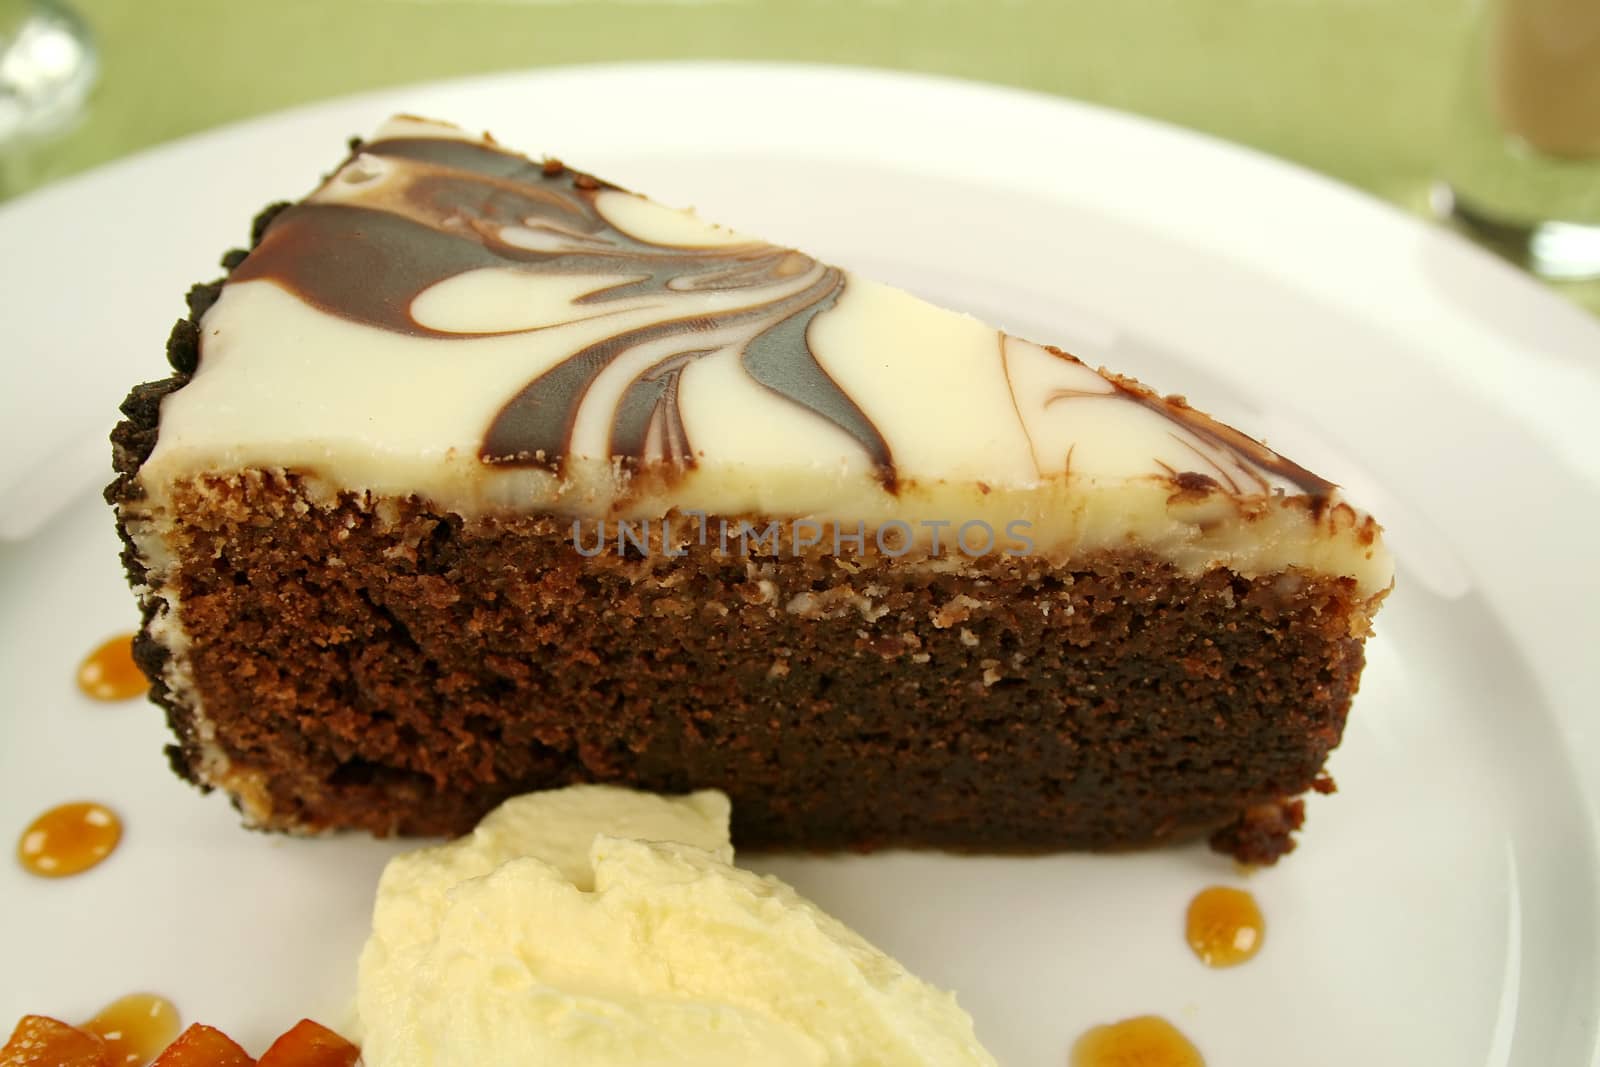 Rich chocolate cake with orange toffee and cream with a mint garnish.